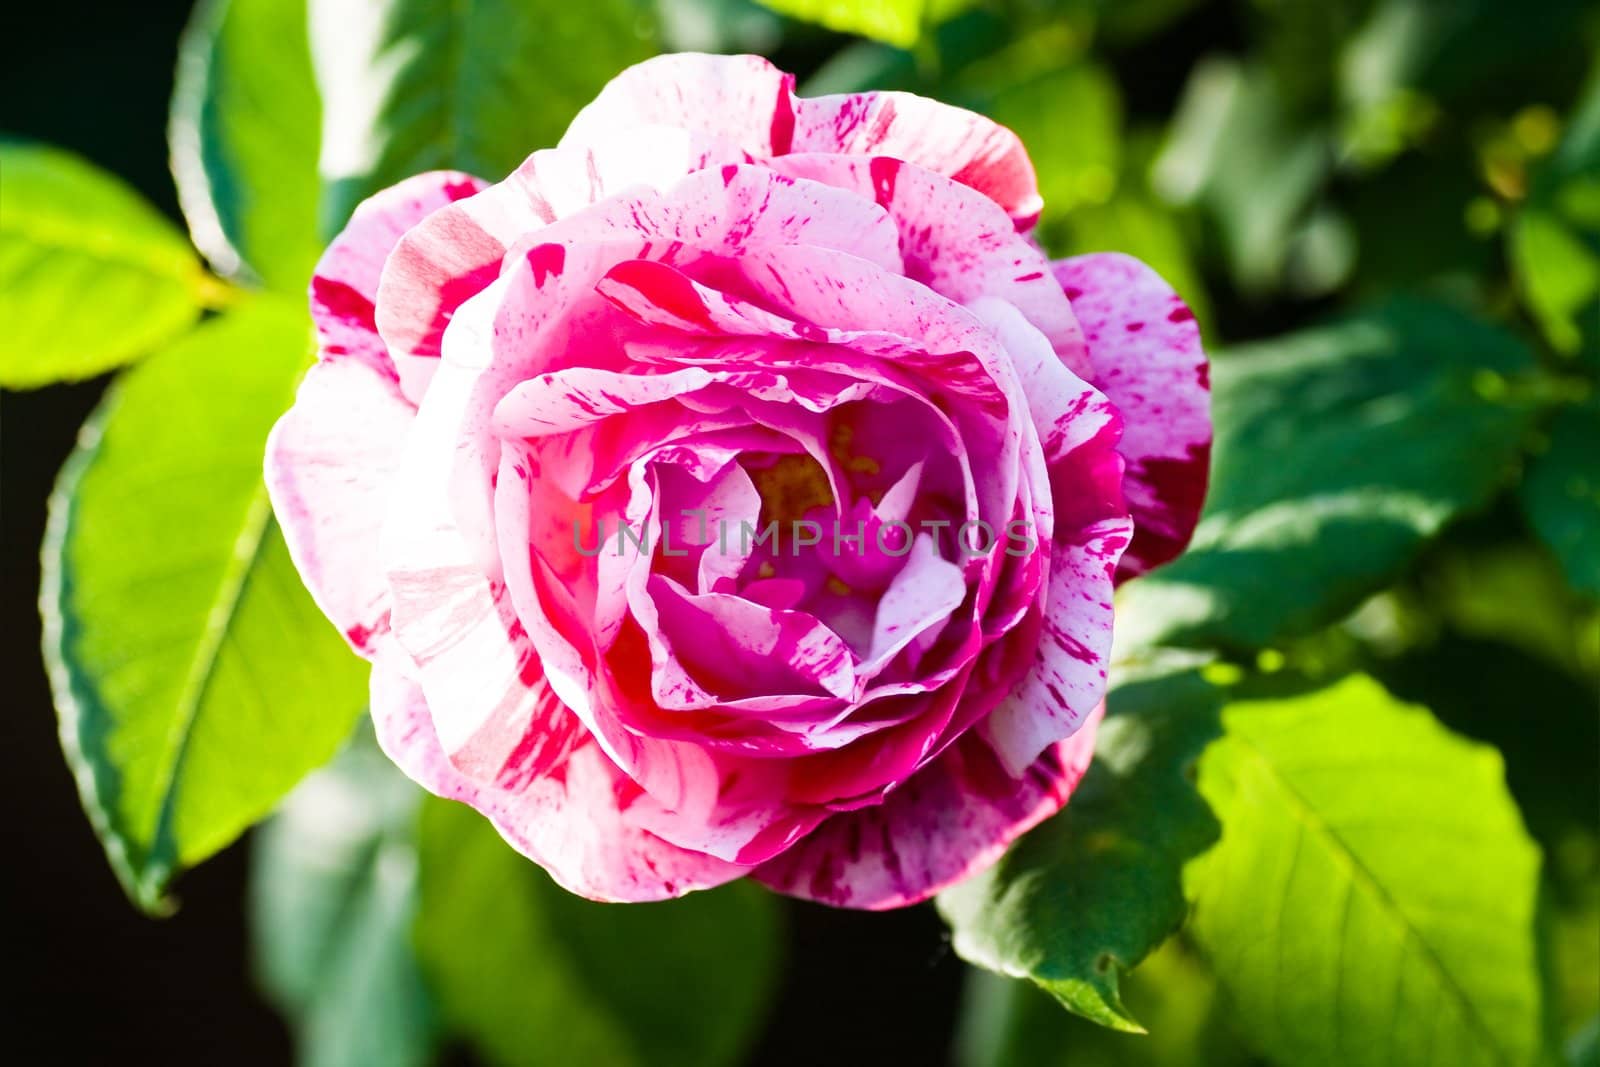 Historic scented rose "Ferdinand Picard" by Colette